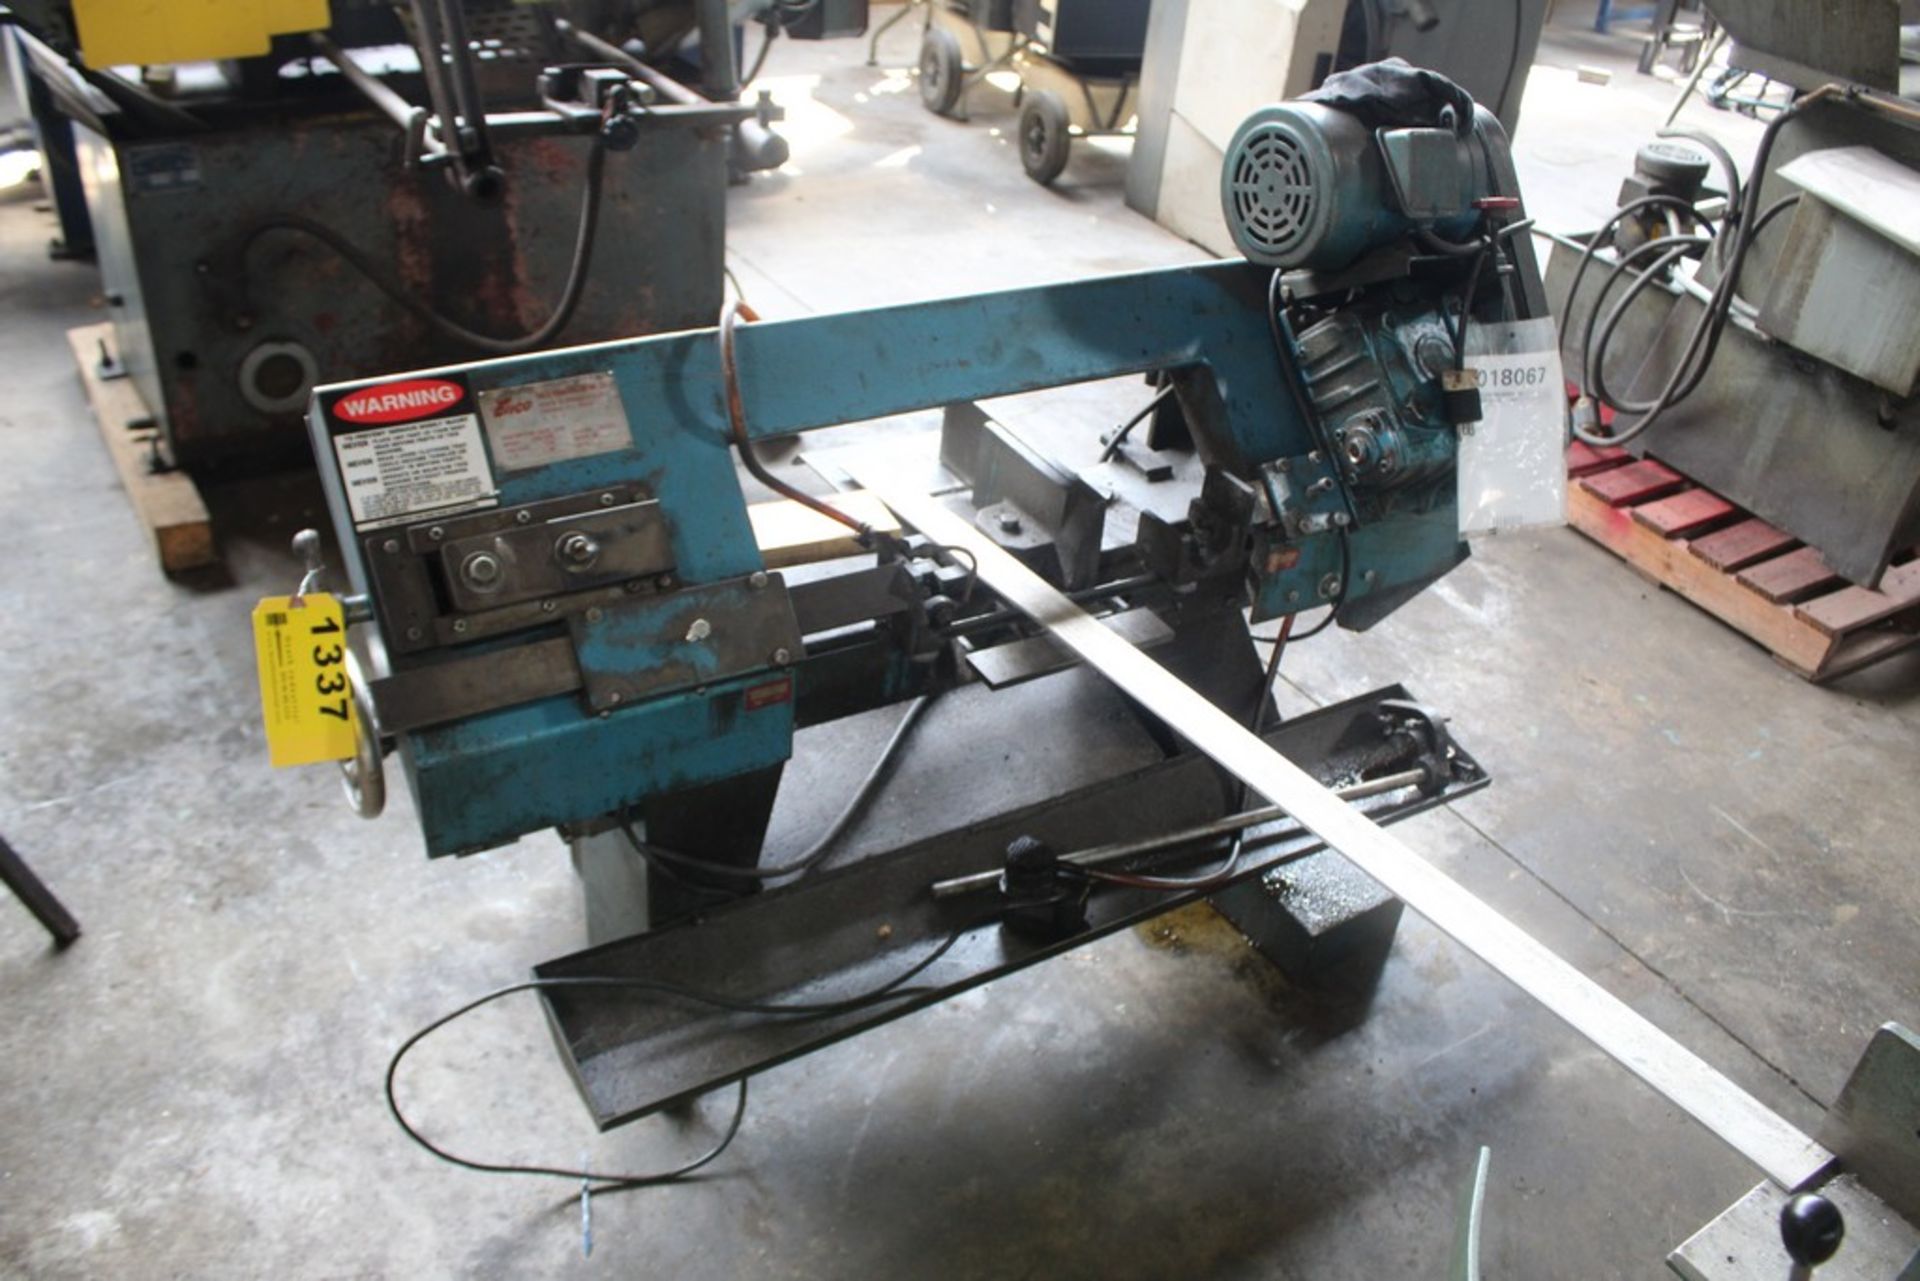 7" X 12" ENCO #HVB-180E HORIZONTAL BAND SAW (MANUAL), S/N 811348 (1988) EQUIPPED WITH VISE, COOLANT,